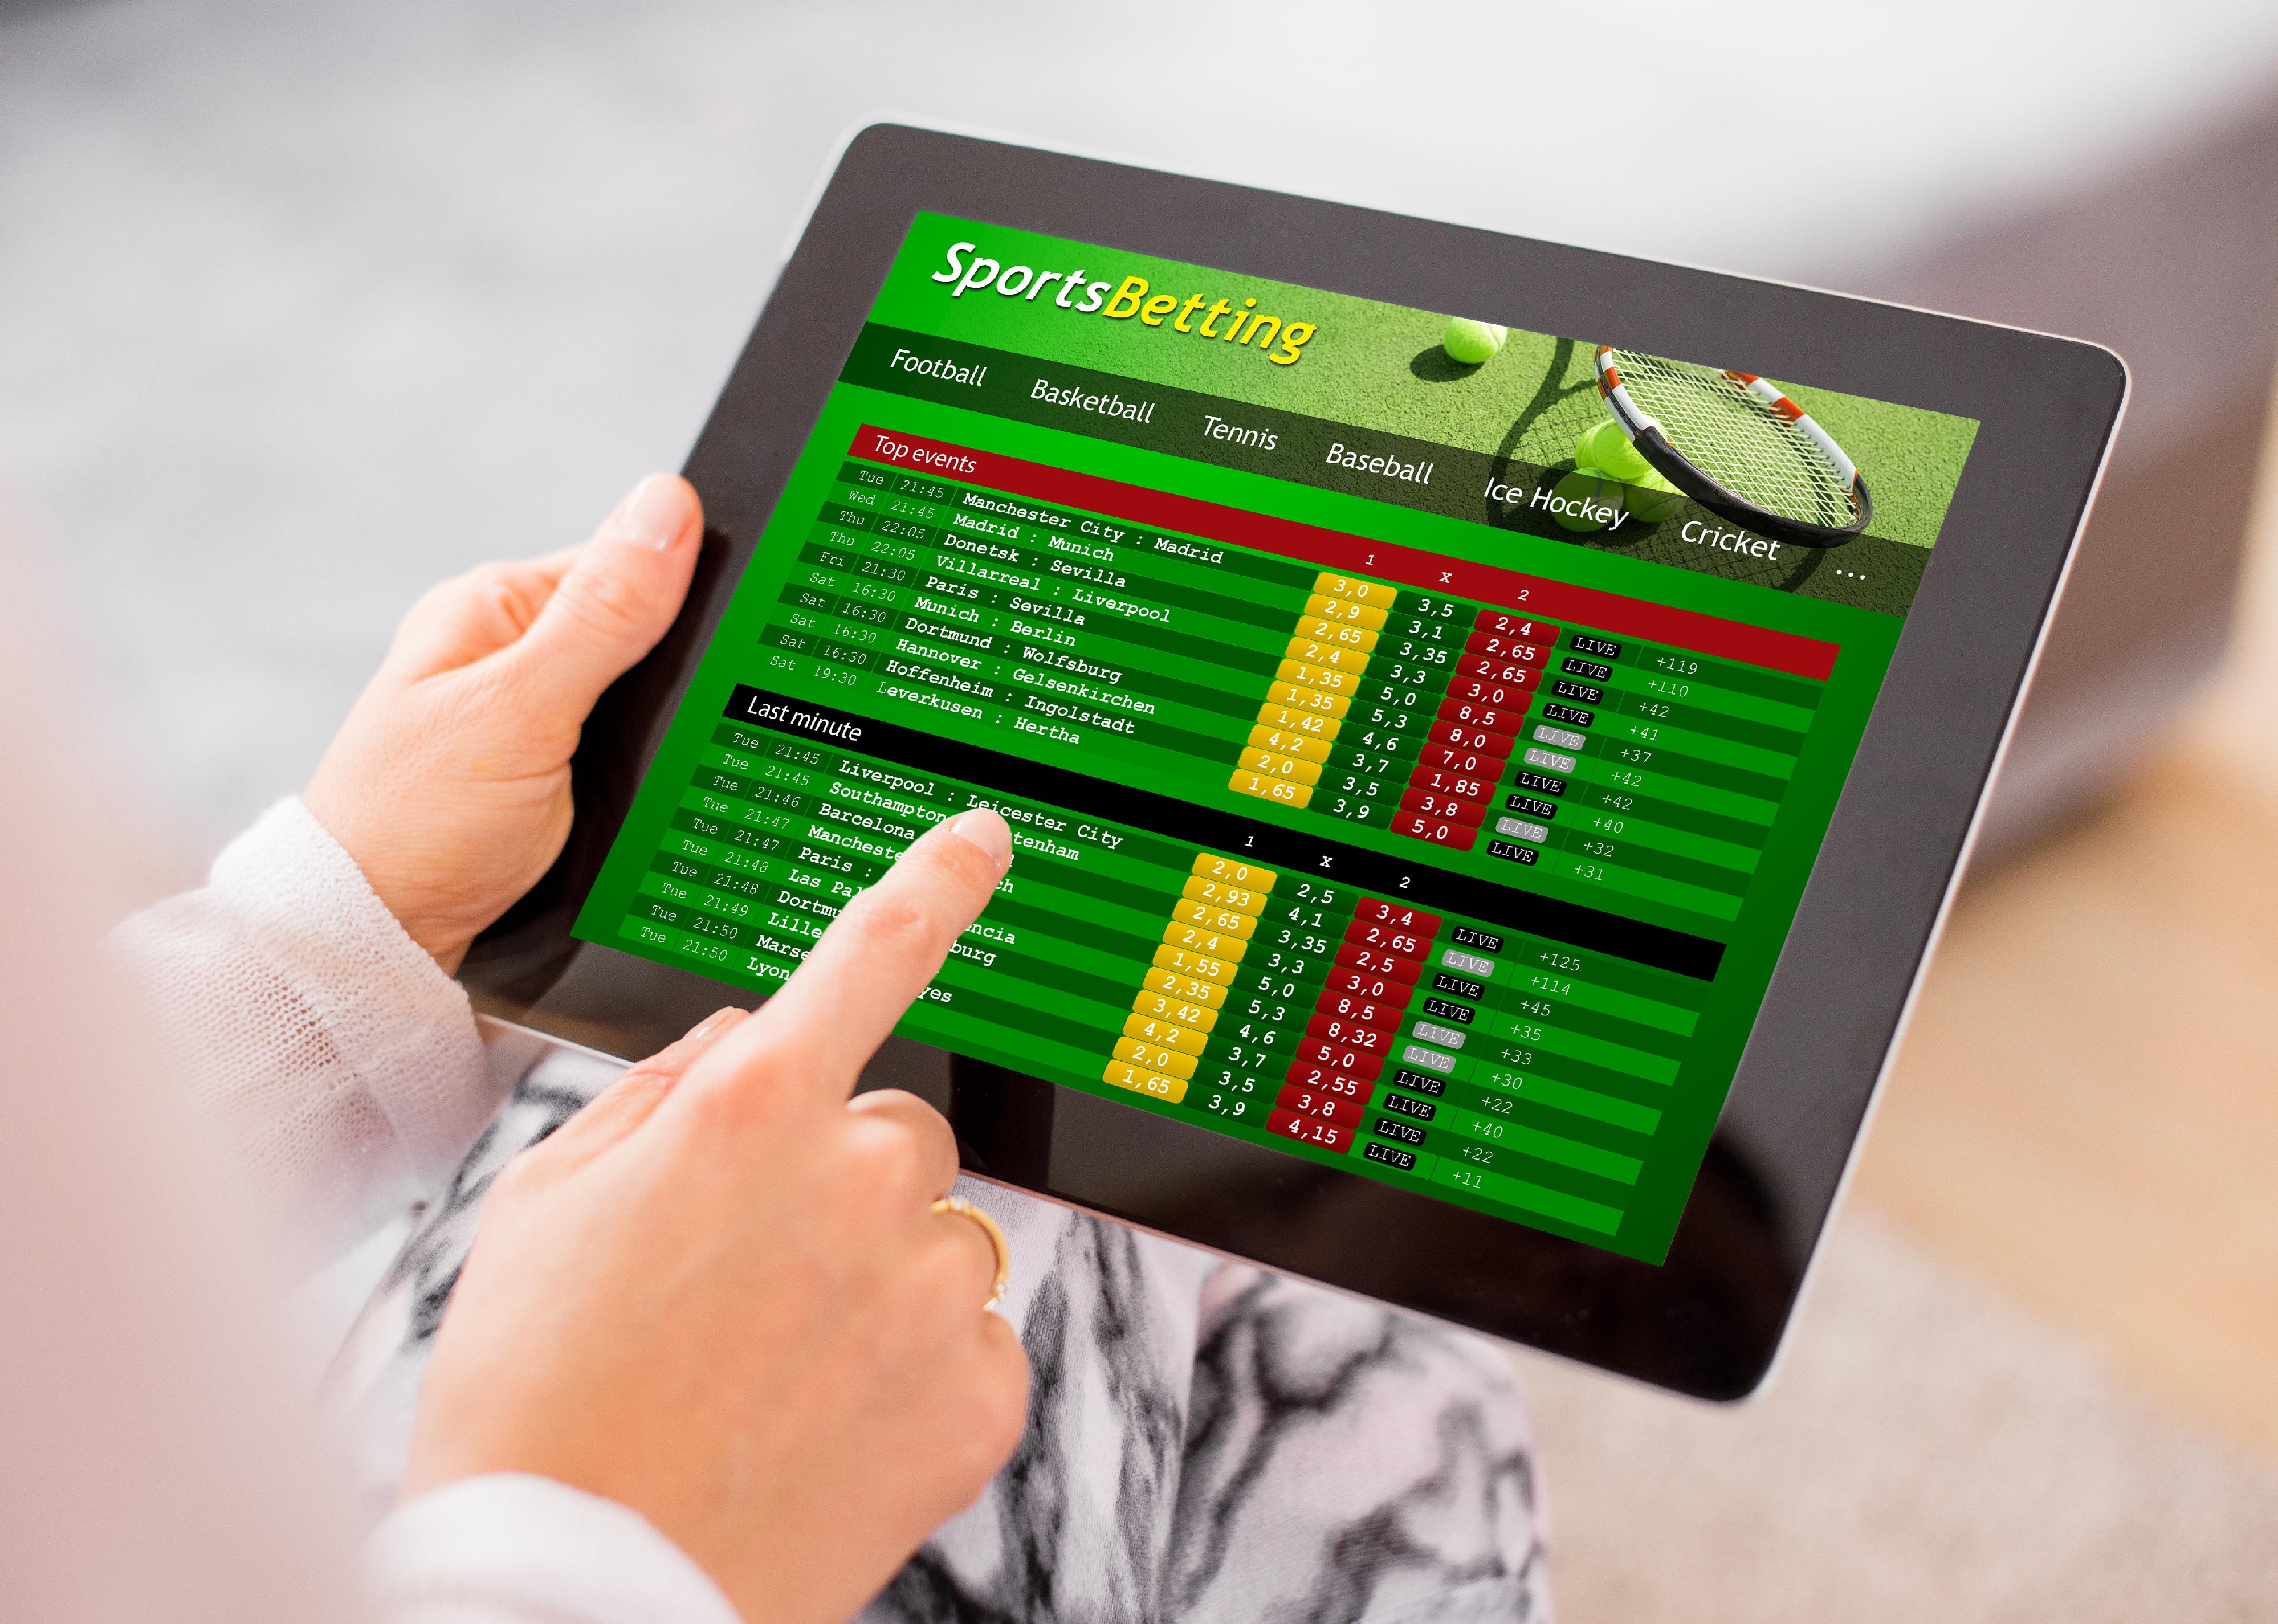 Sports betting app on tablet computer.